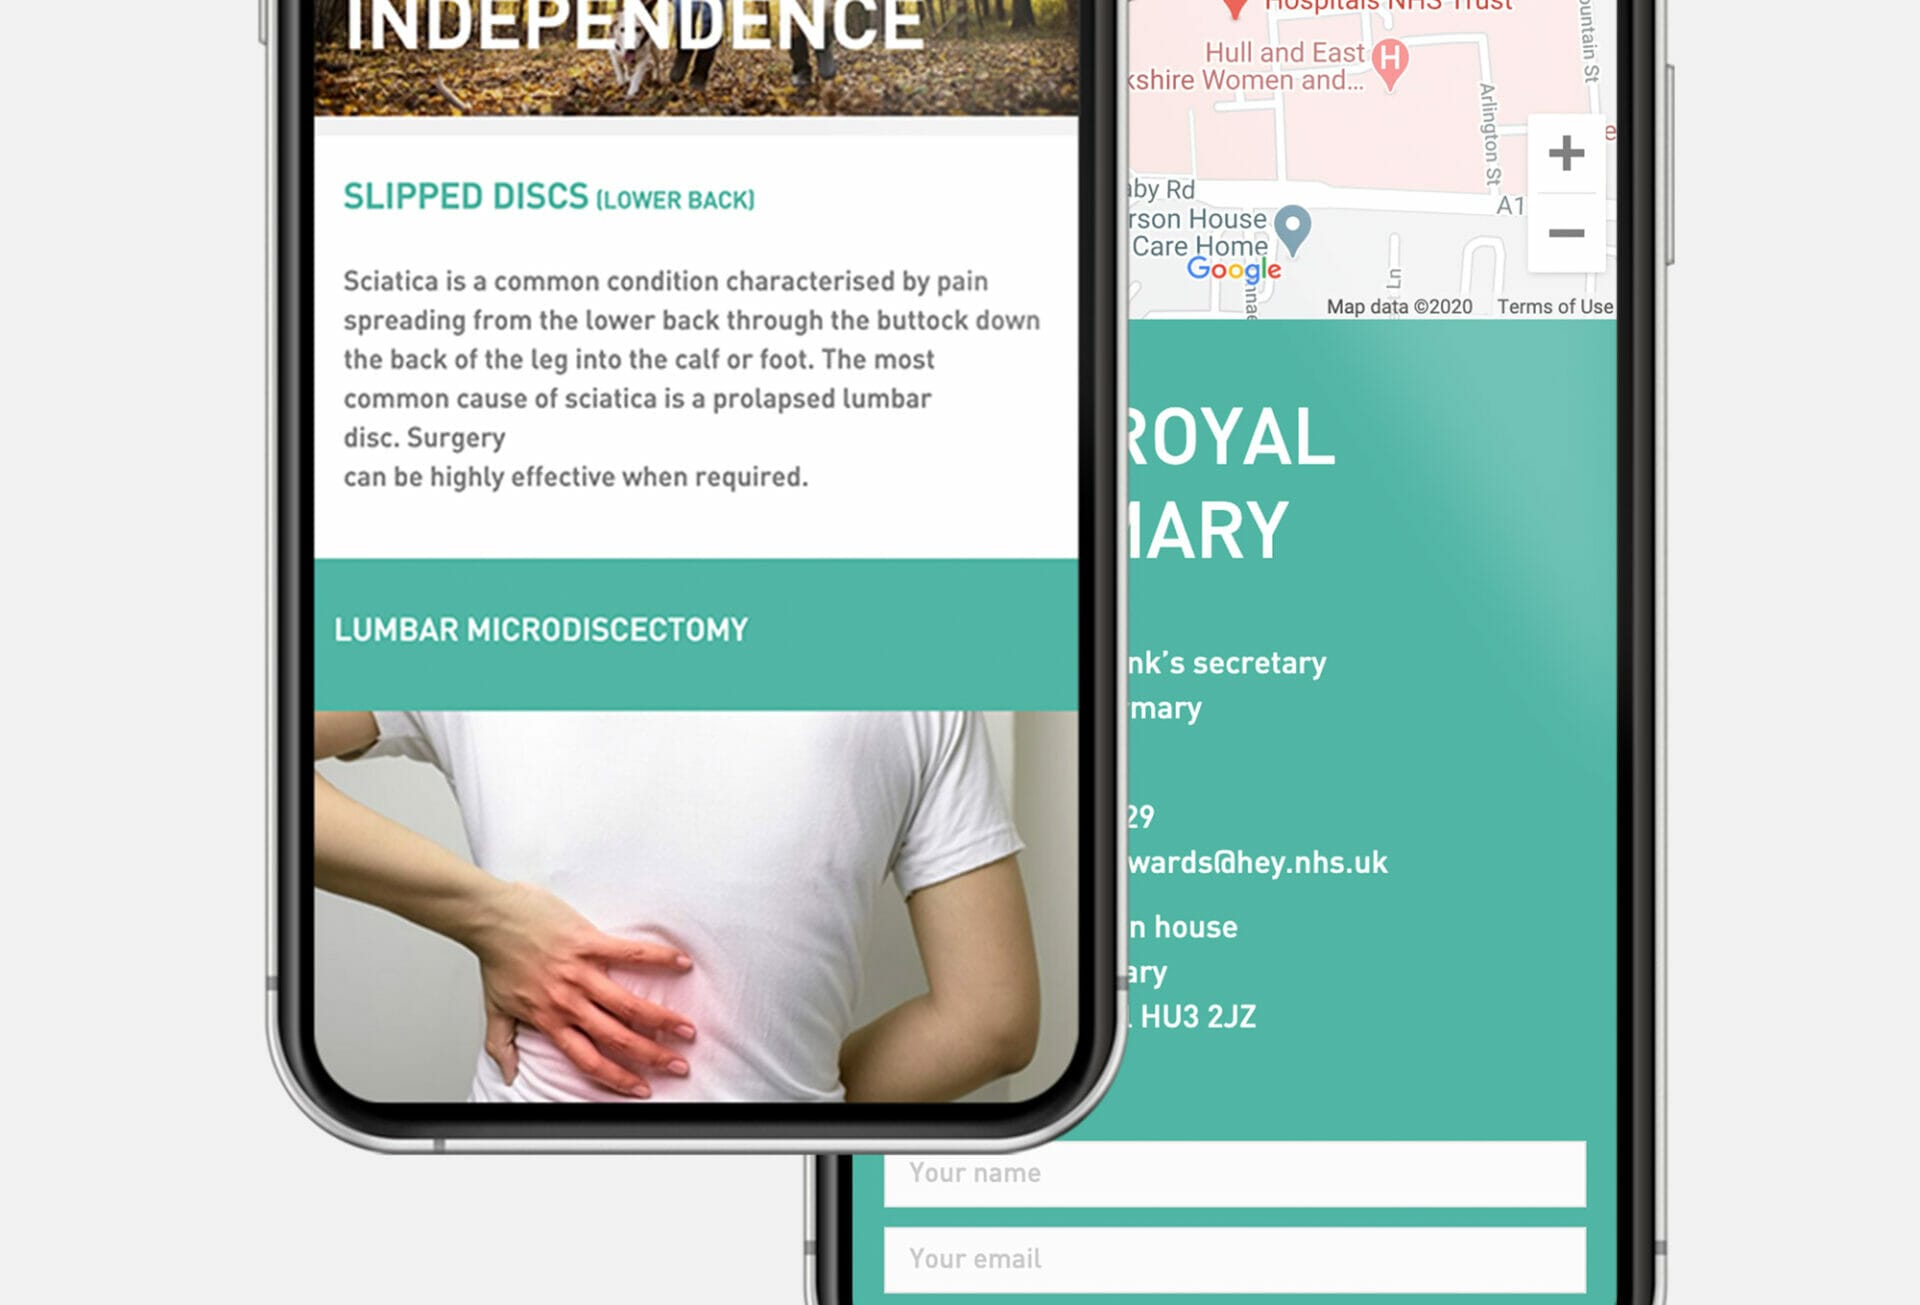 George Spink website on mobile showing image for lumbar microdiscectomy